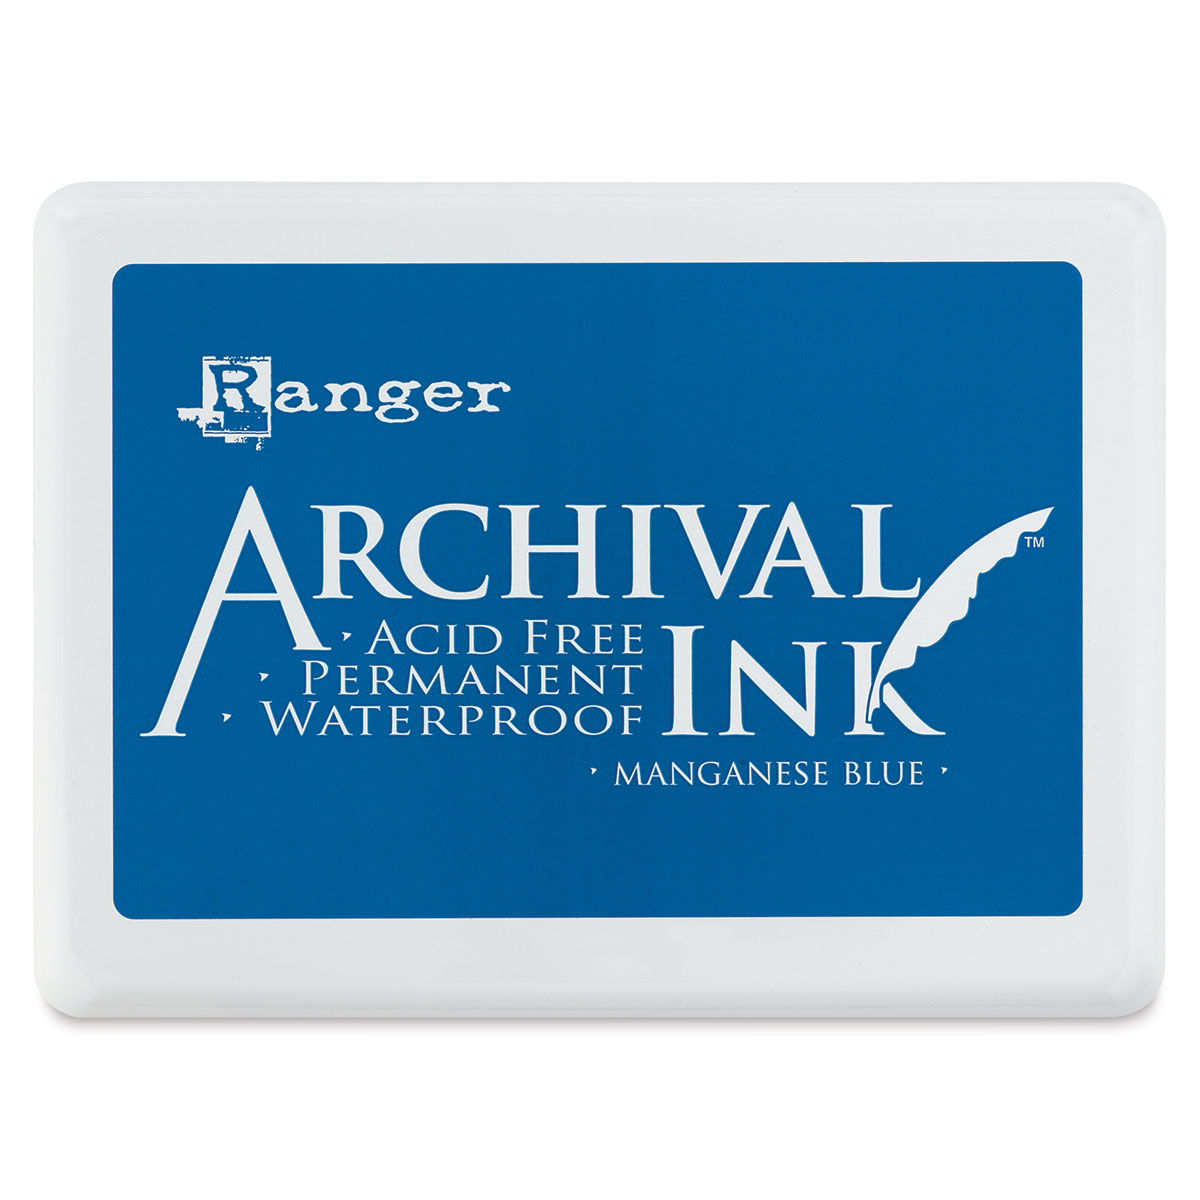 Ranger Archival Ink Vermillion Red Permanent Stamping Ink Pad - TH